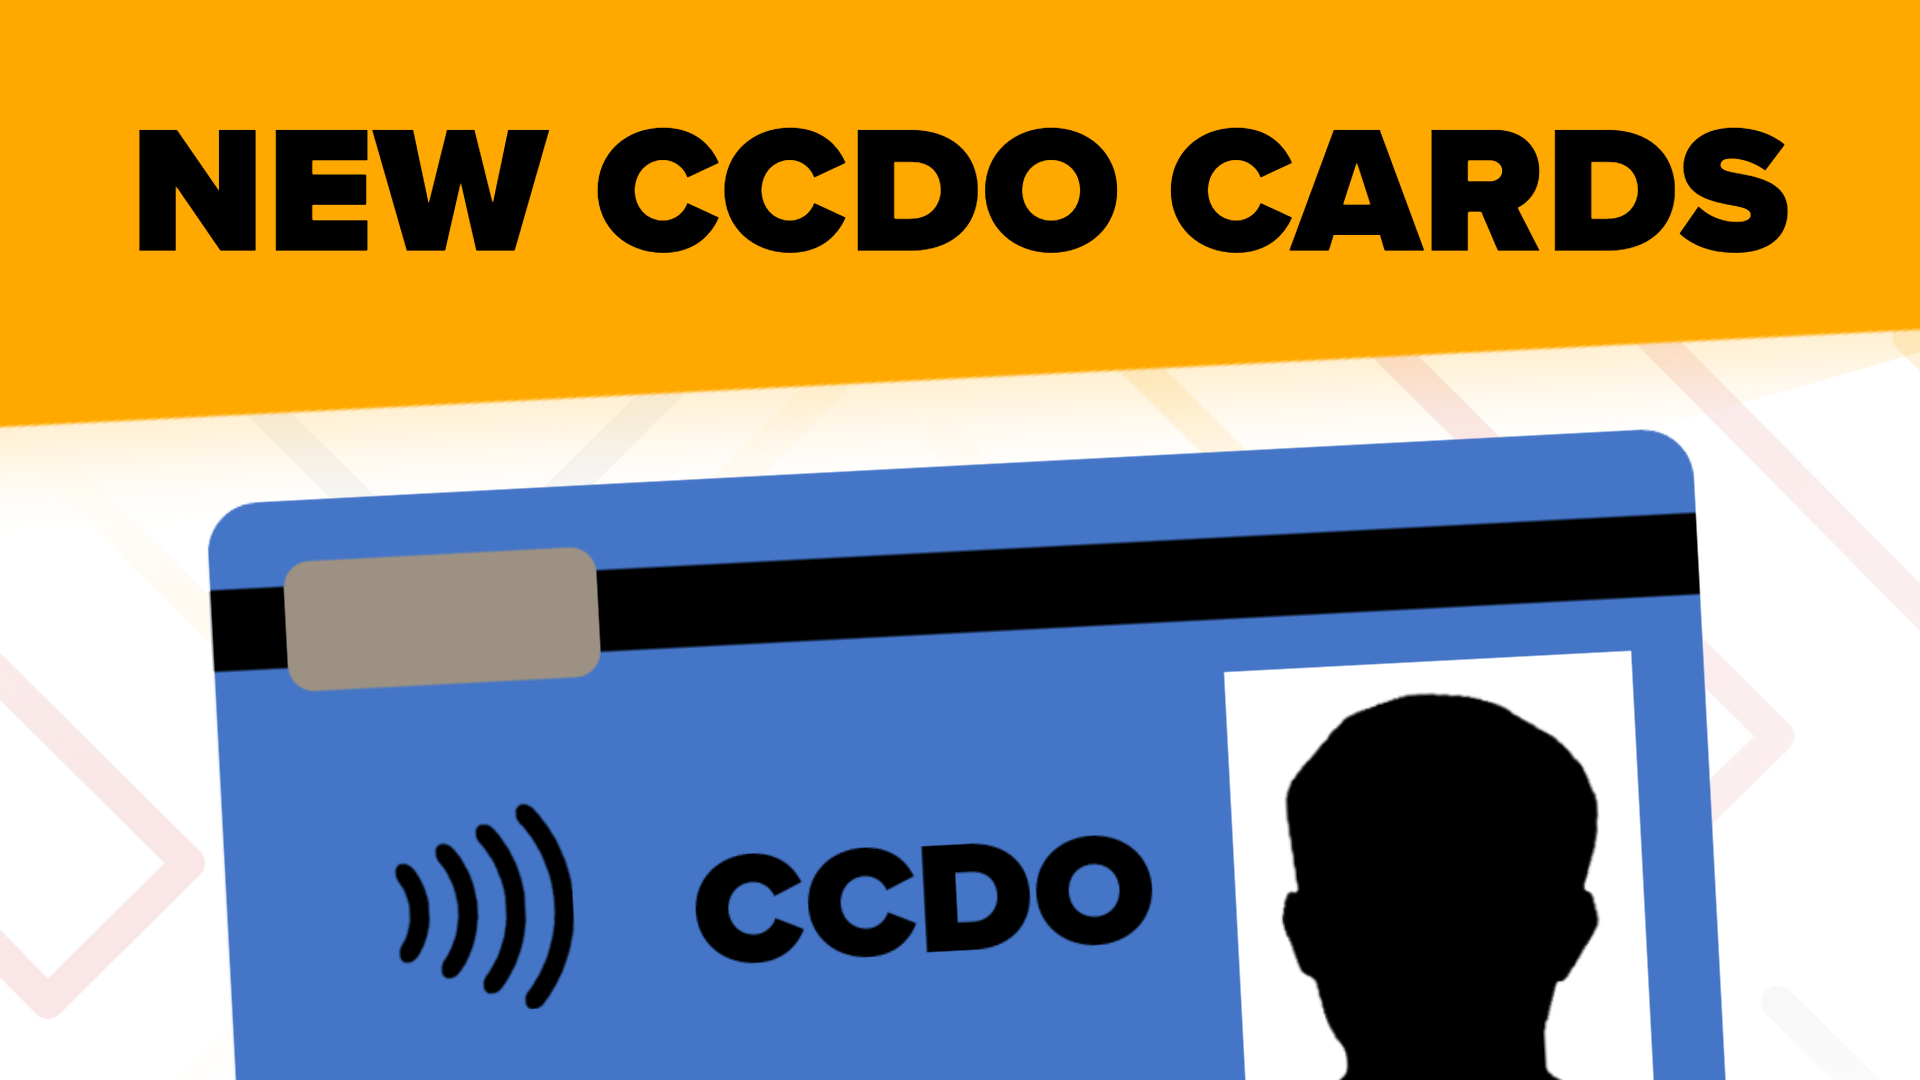 CCDO Cards are Changing